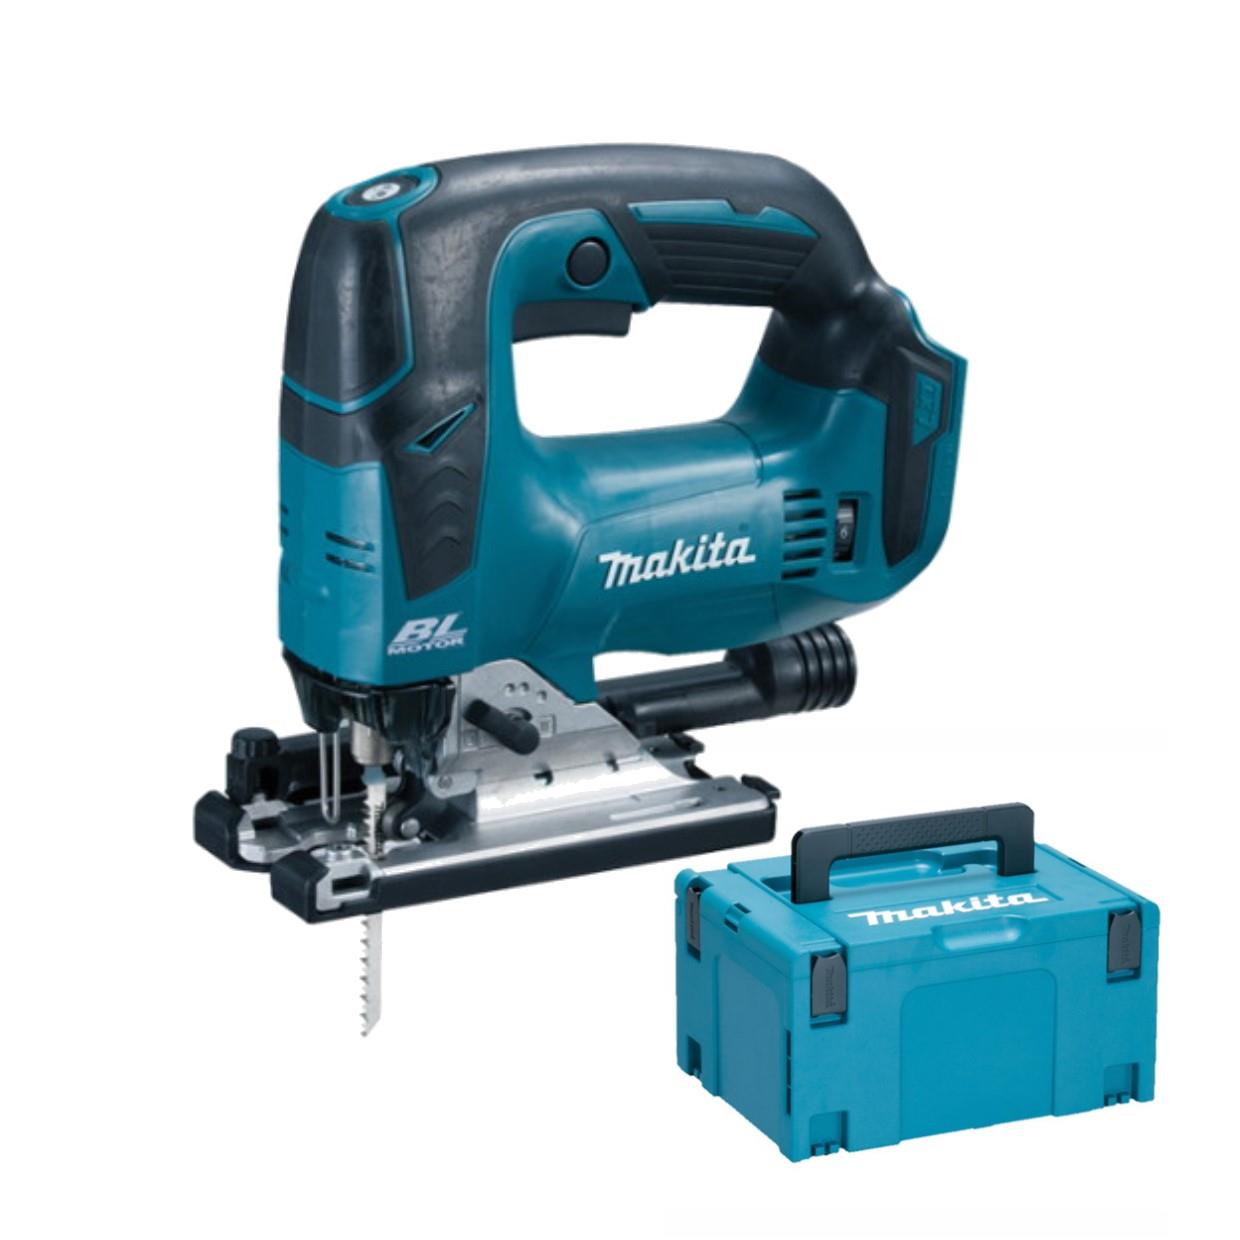 Makita DJV182ZJ Brushless Cordless Jigsaw; 18 Volt; Tool-less Blade Change; Low No Load Speed; Bare Unit (Body Only); No 2 Makpac Case